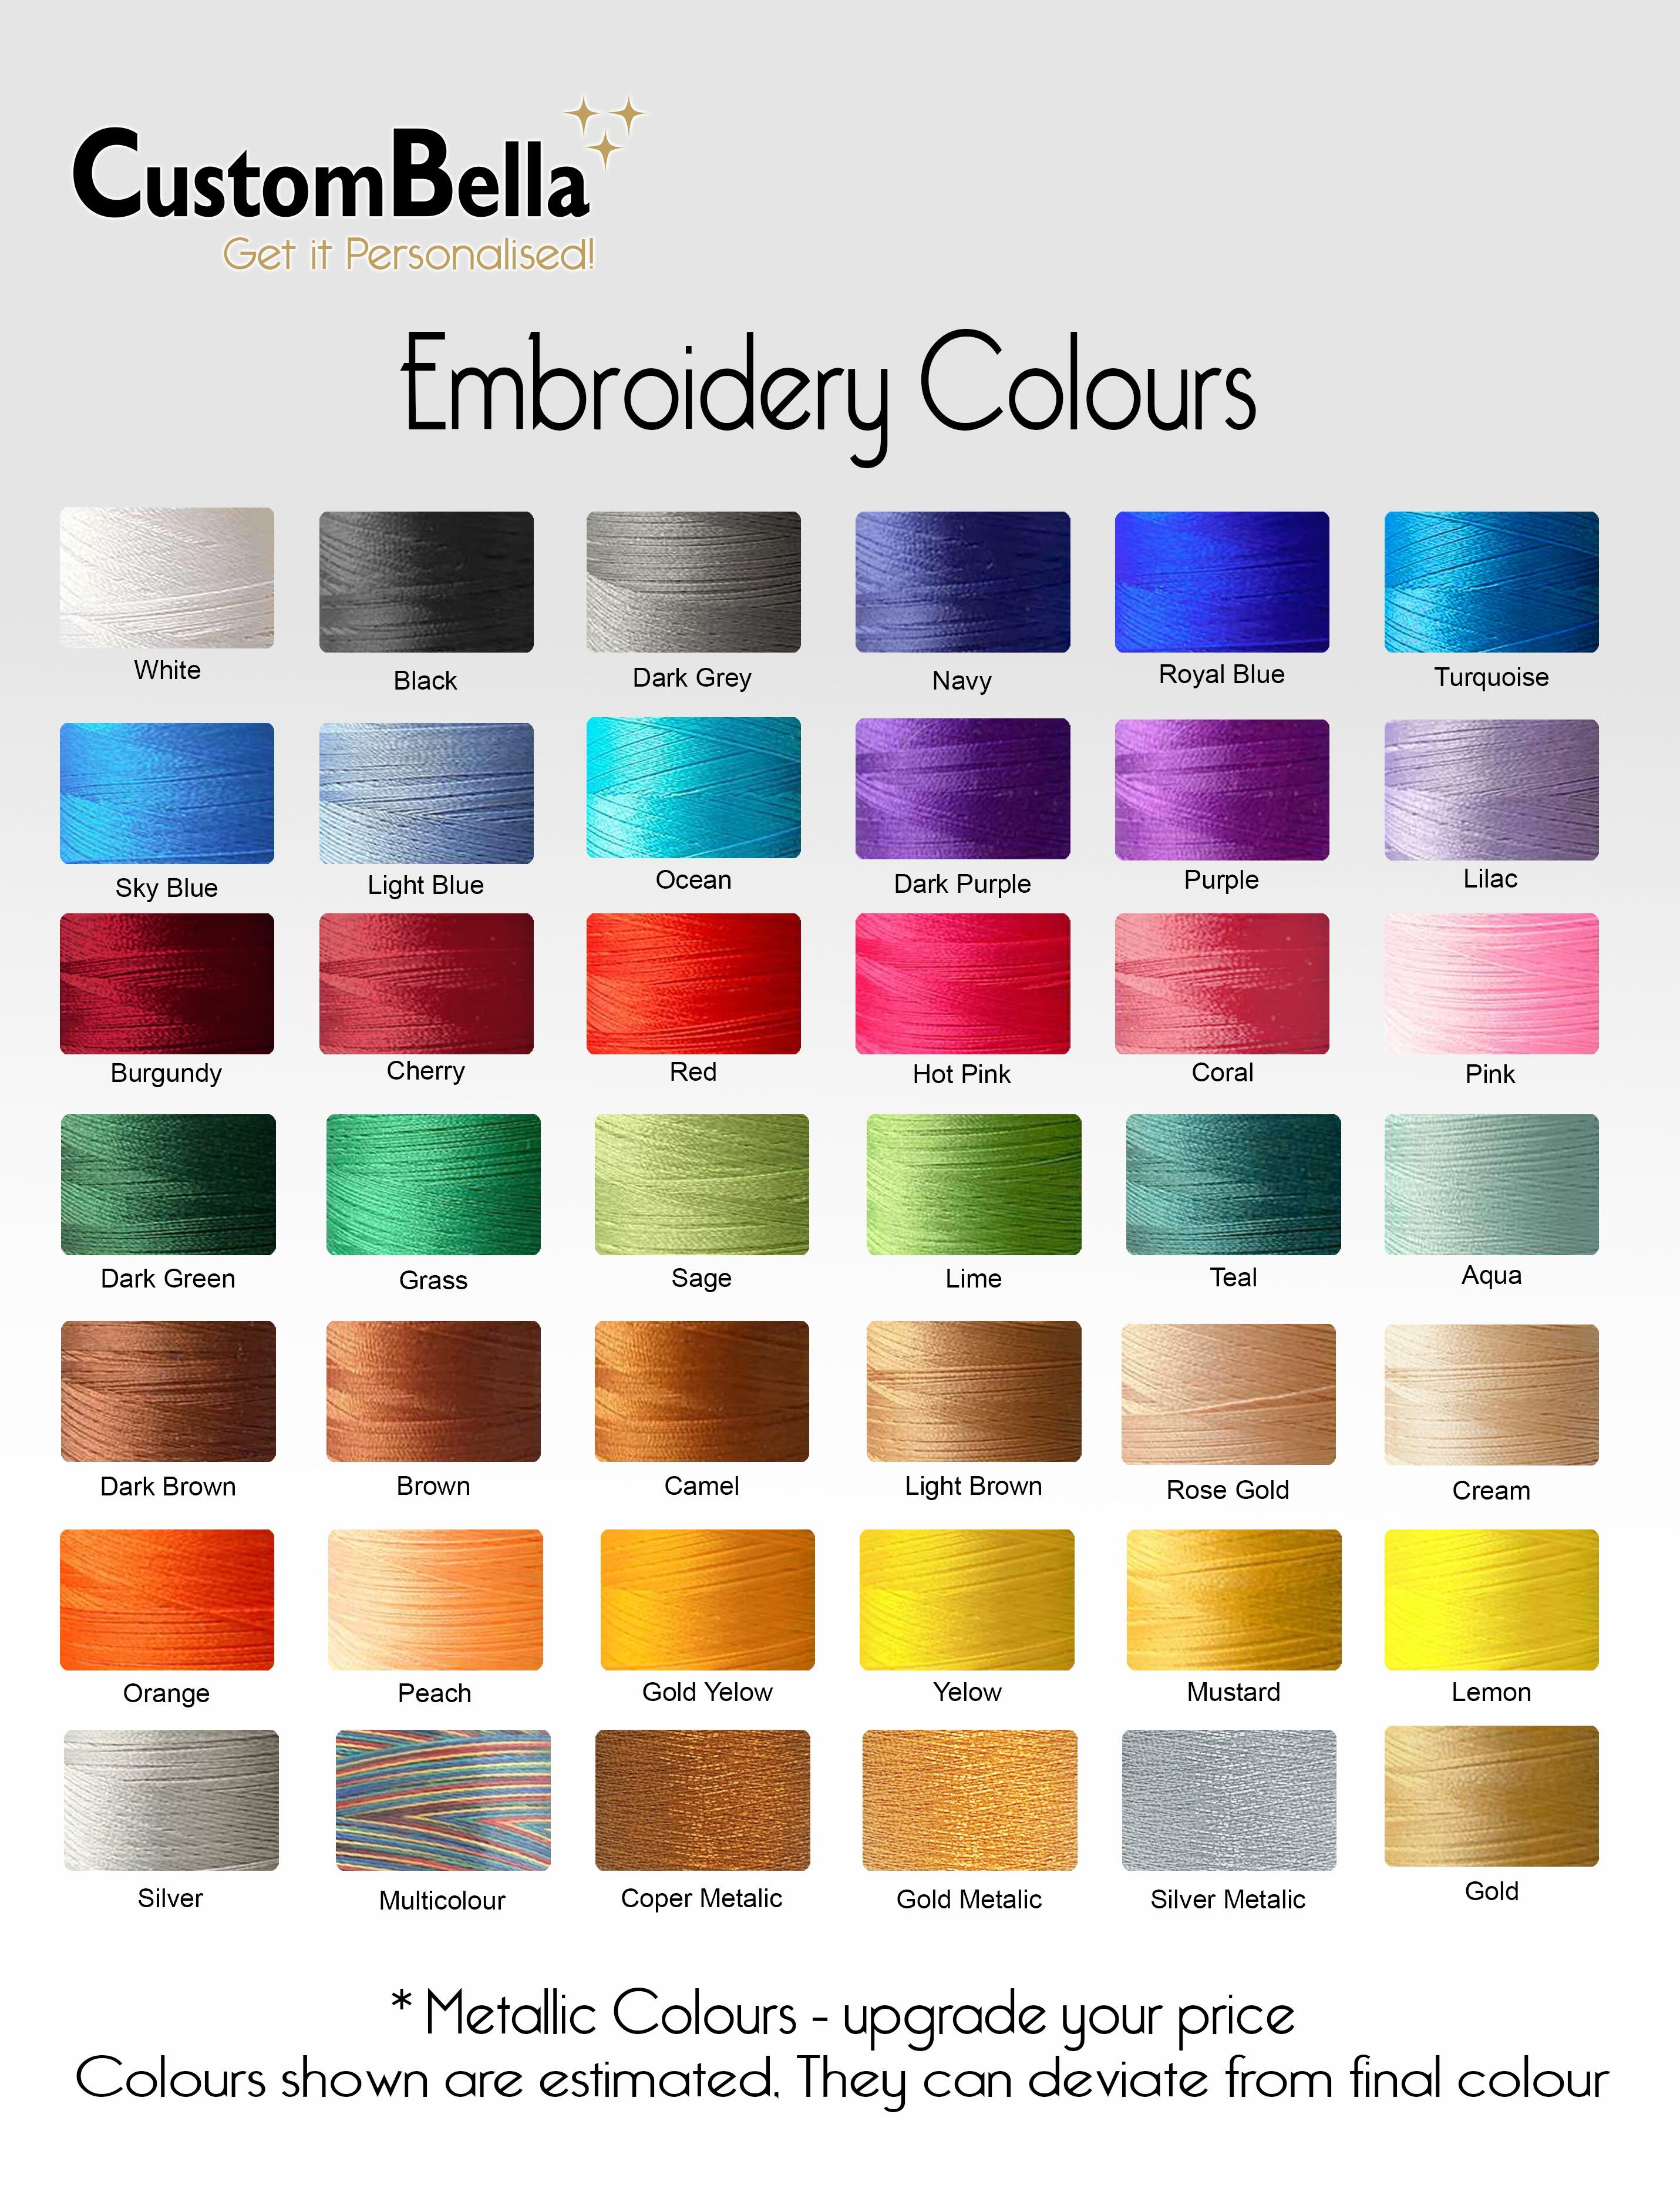 Custombella embroidery colours to select